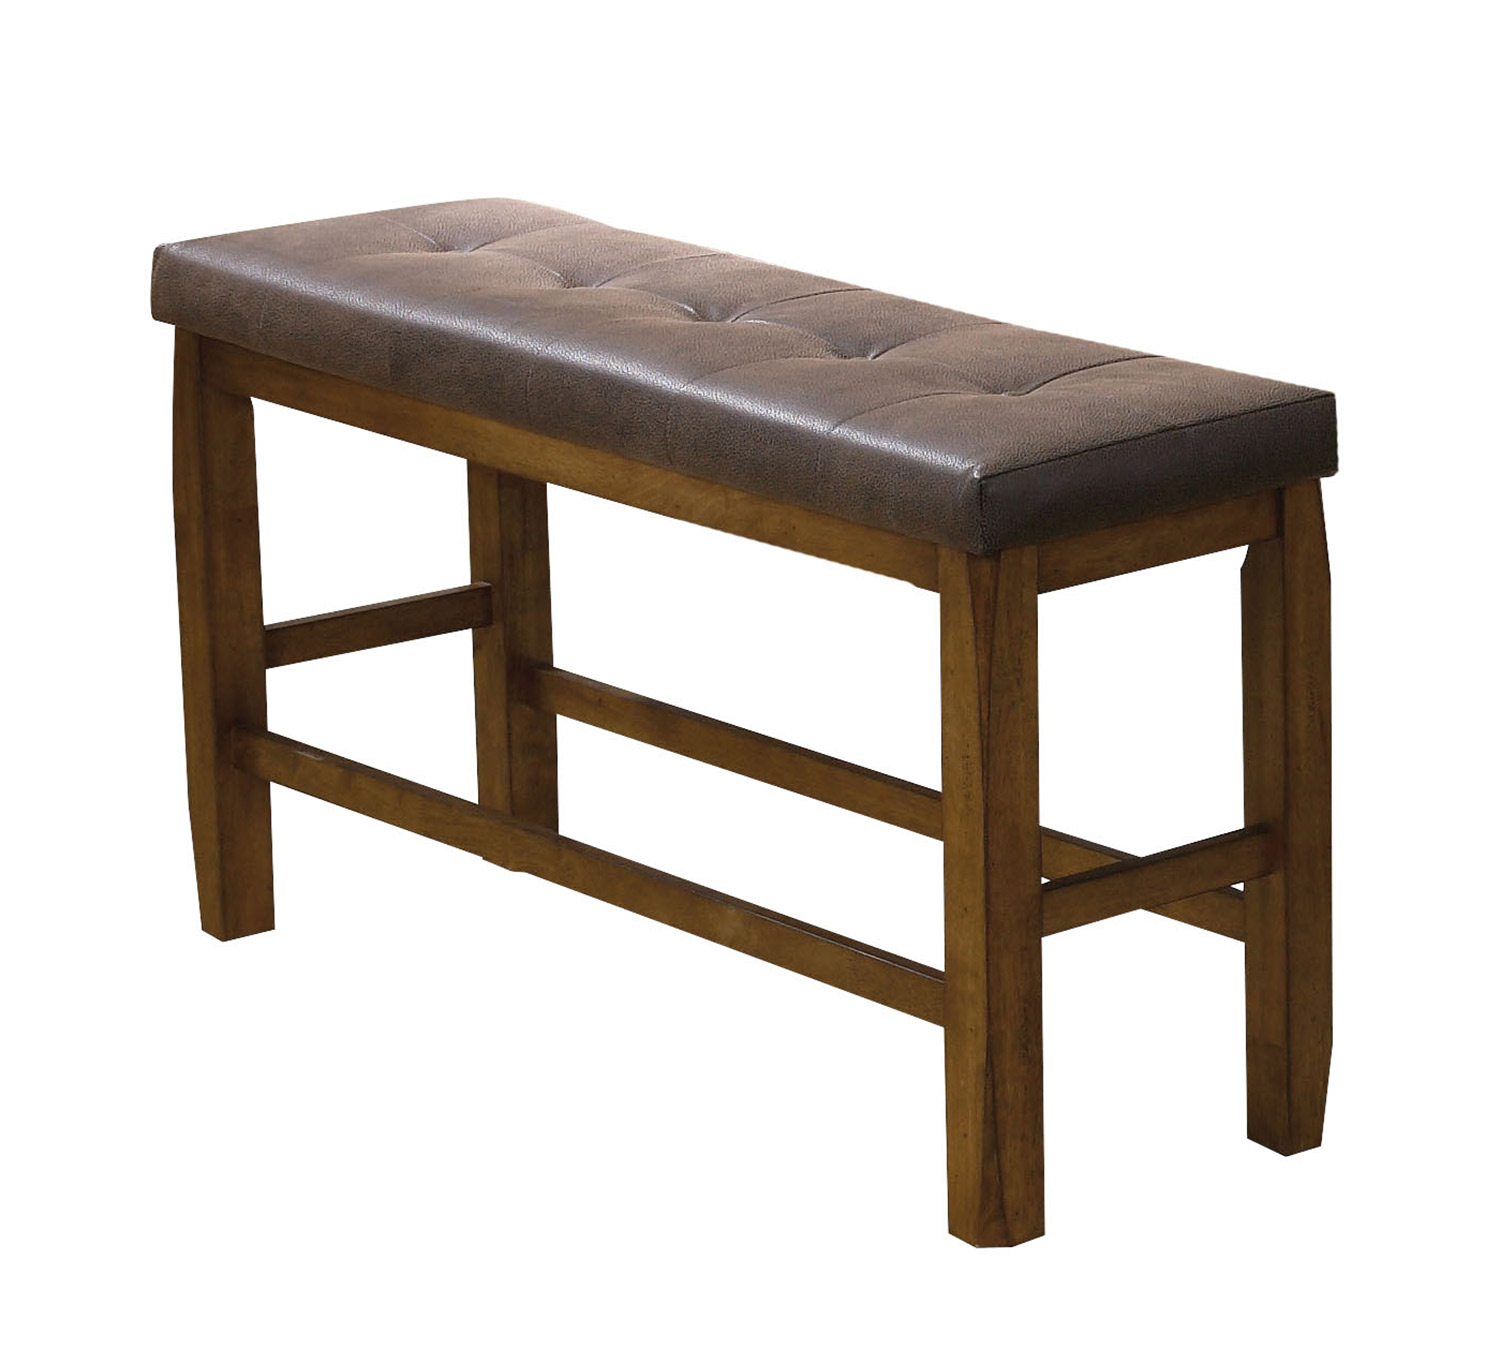 Acme Morrison Counter Height Bench with Storage - Brown Vinyl/Oak